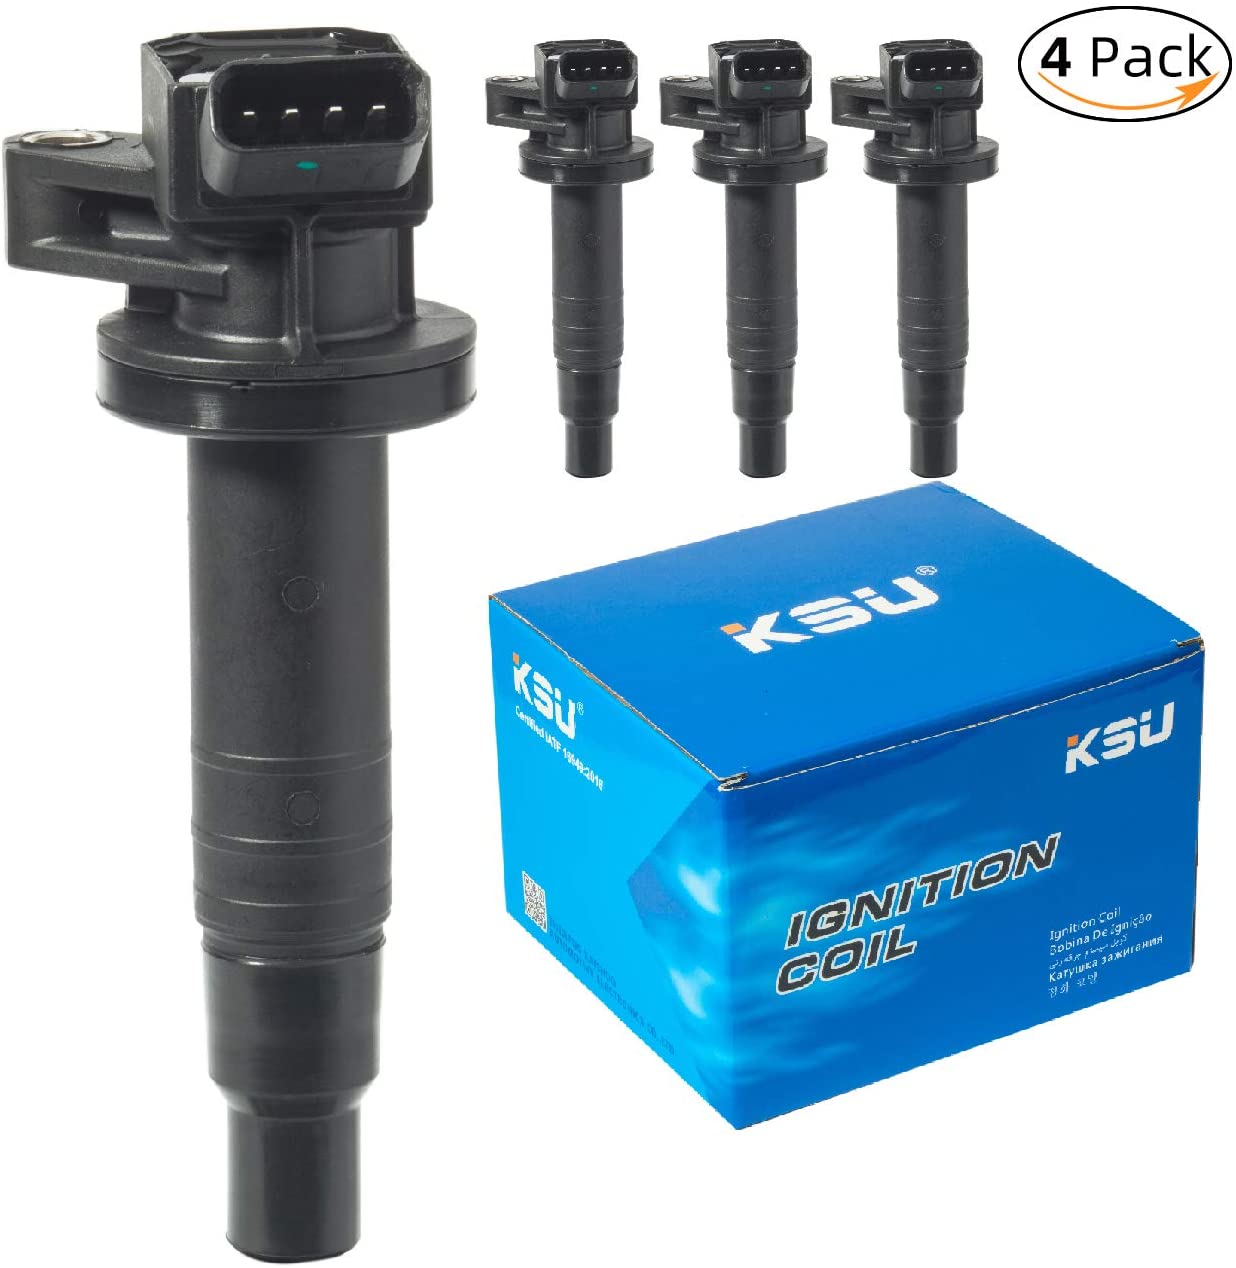 KSU Compatible With Ignition coil pack for 05 Toyota Celica 2001 Chevy prizm coil 2001-2008 Toyota corolla coil GT VE Matrix MR2 Spyder 2000 2003 2009 Pontiac Vibe 1.8L UF247 UF315(1 Pack)